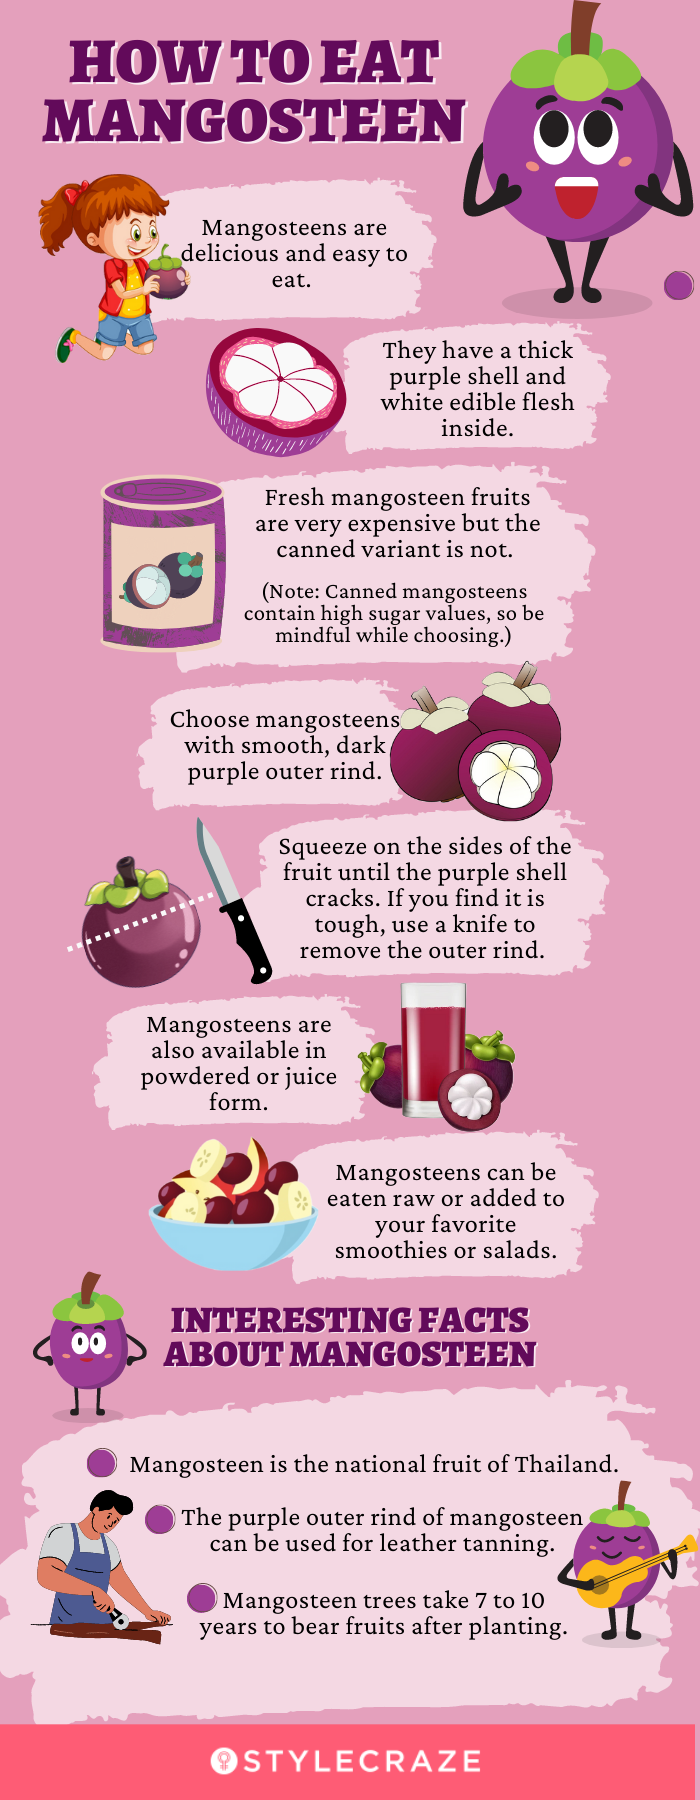 how to eat mangosteen (infographic)